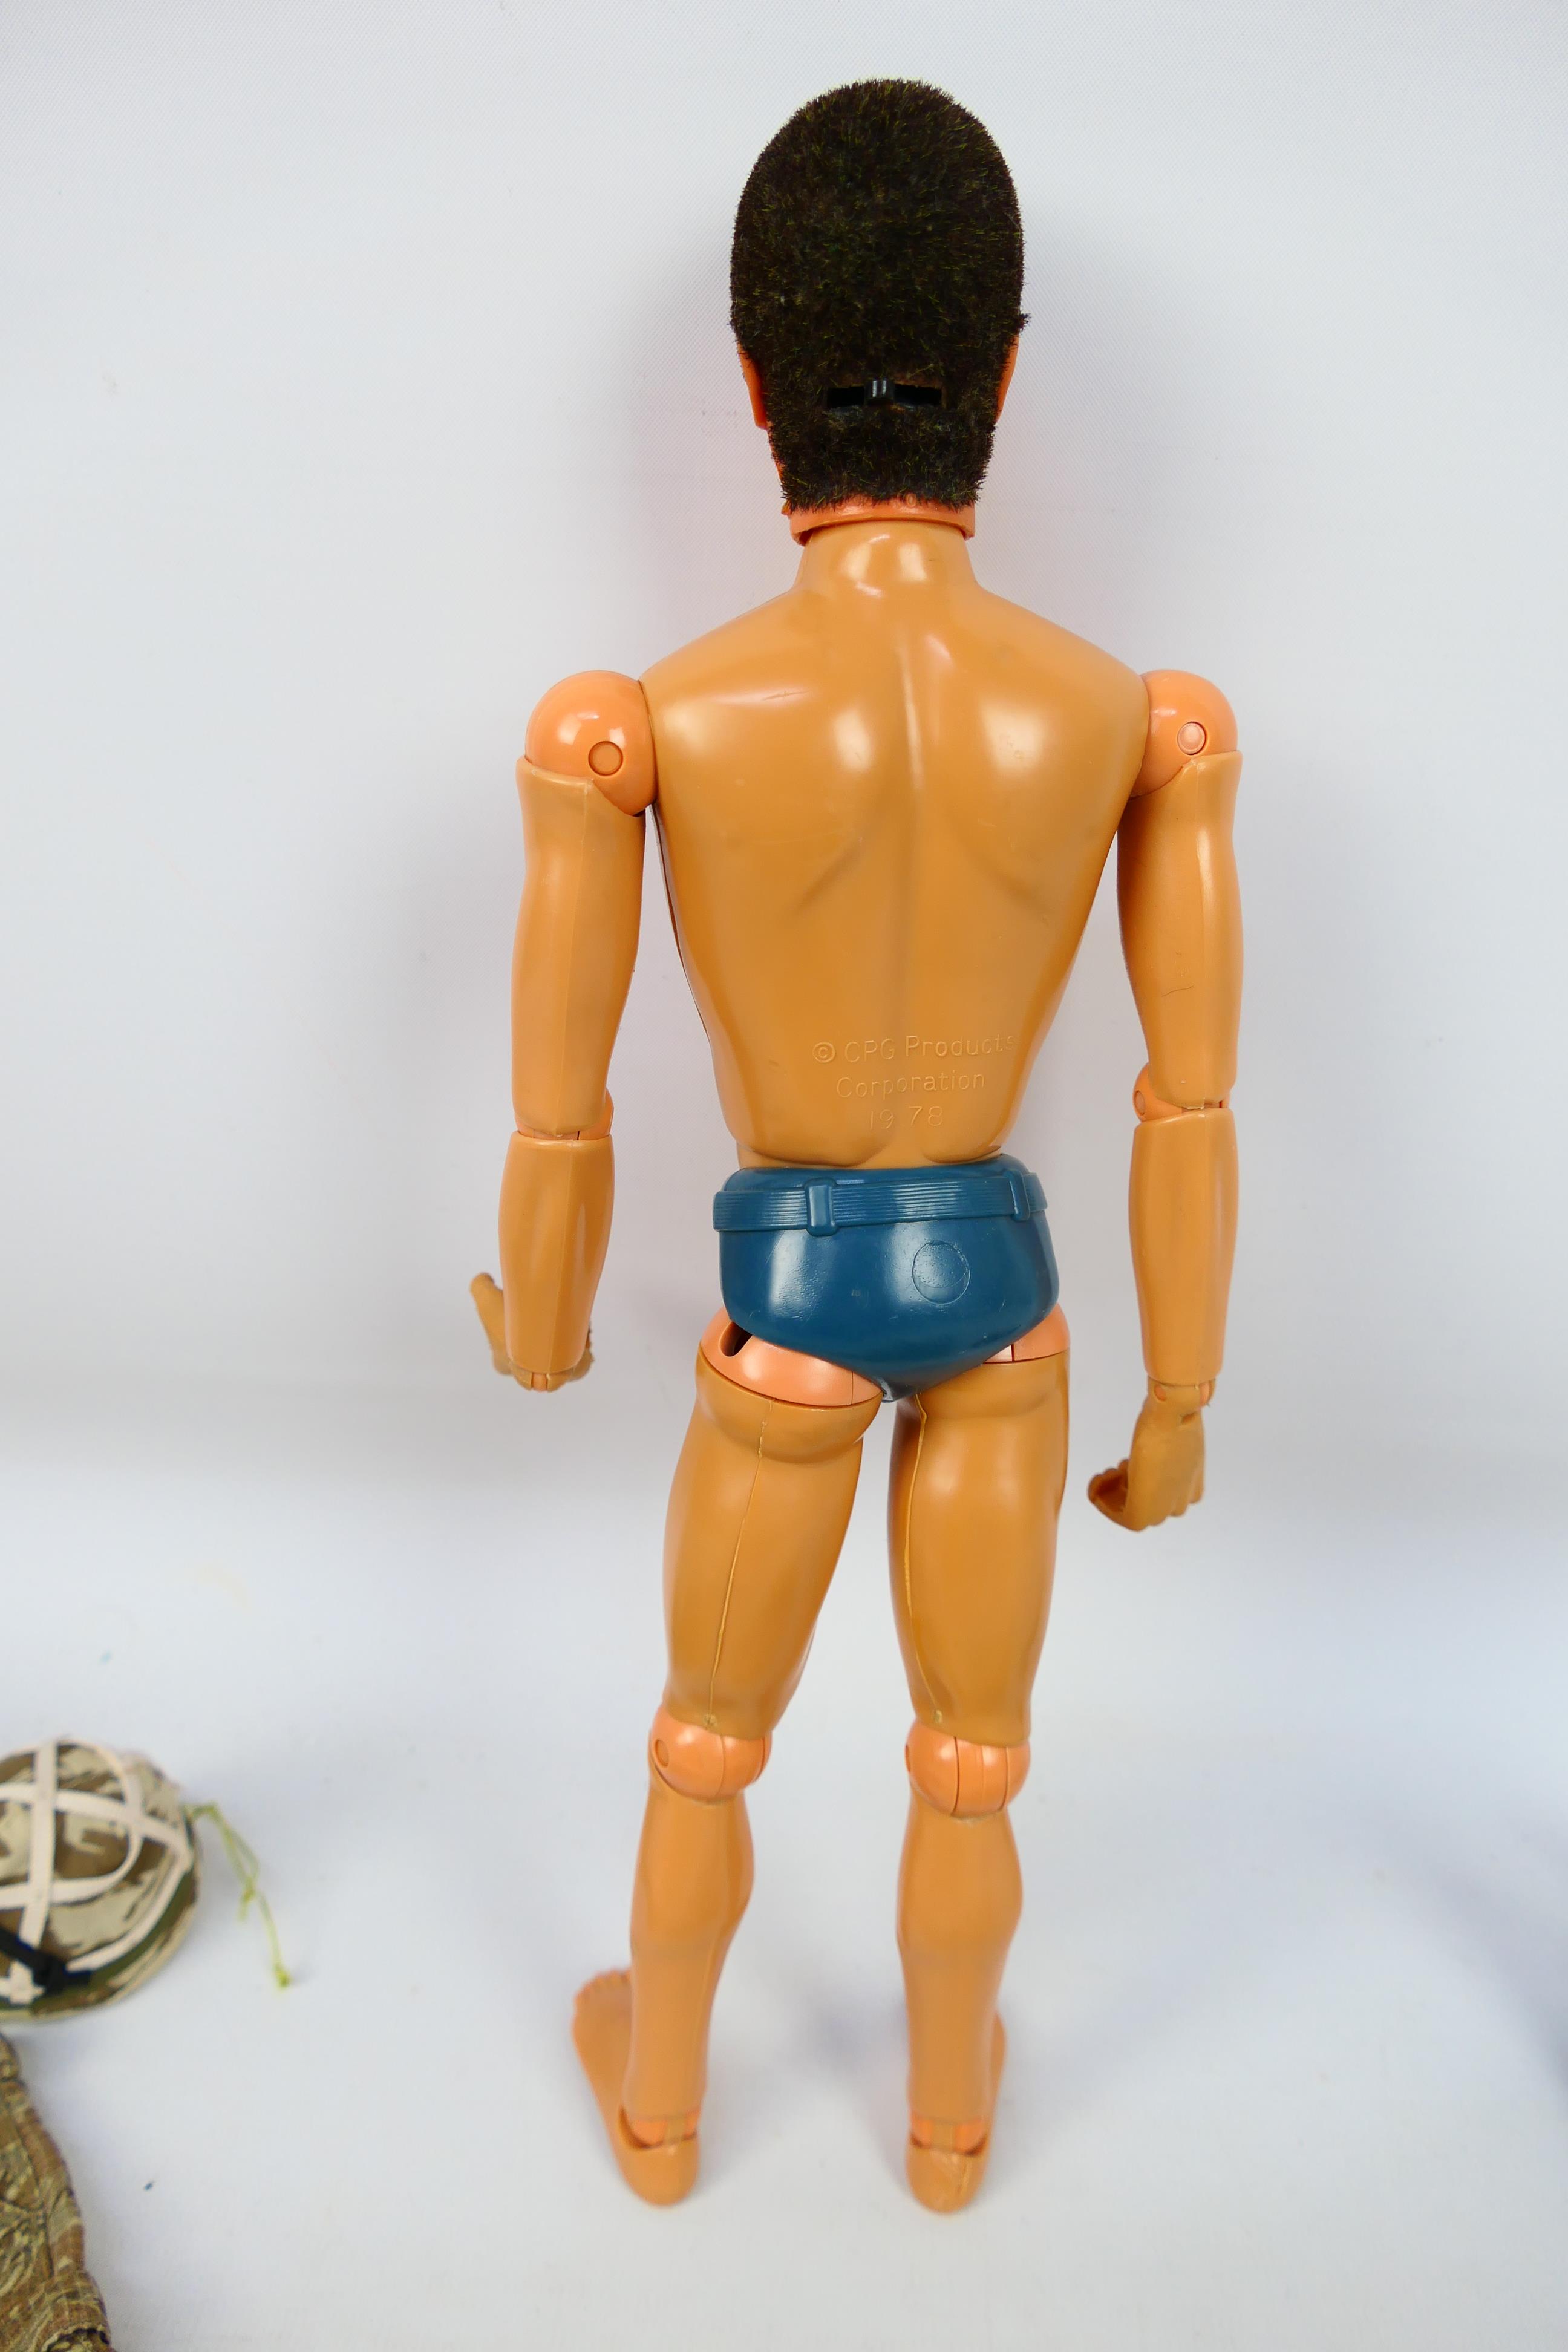 Palitoy - Action Man - An unboxed 1978 Action Man action figure with Flock hair, - Image 8 of 12